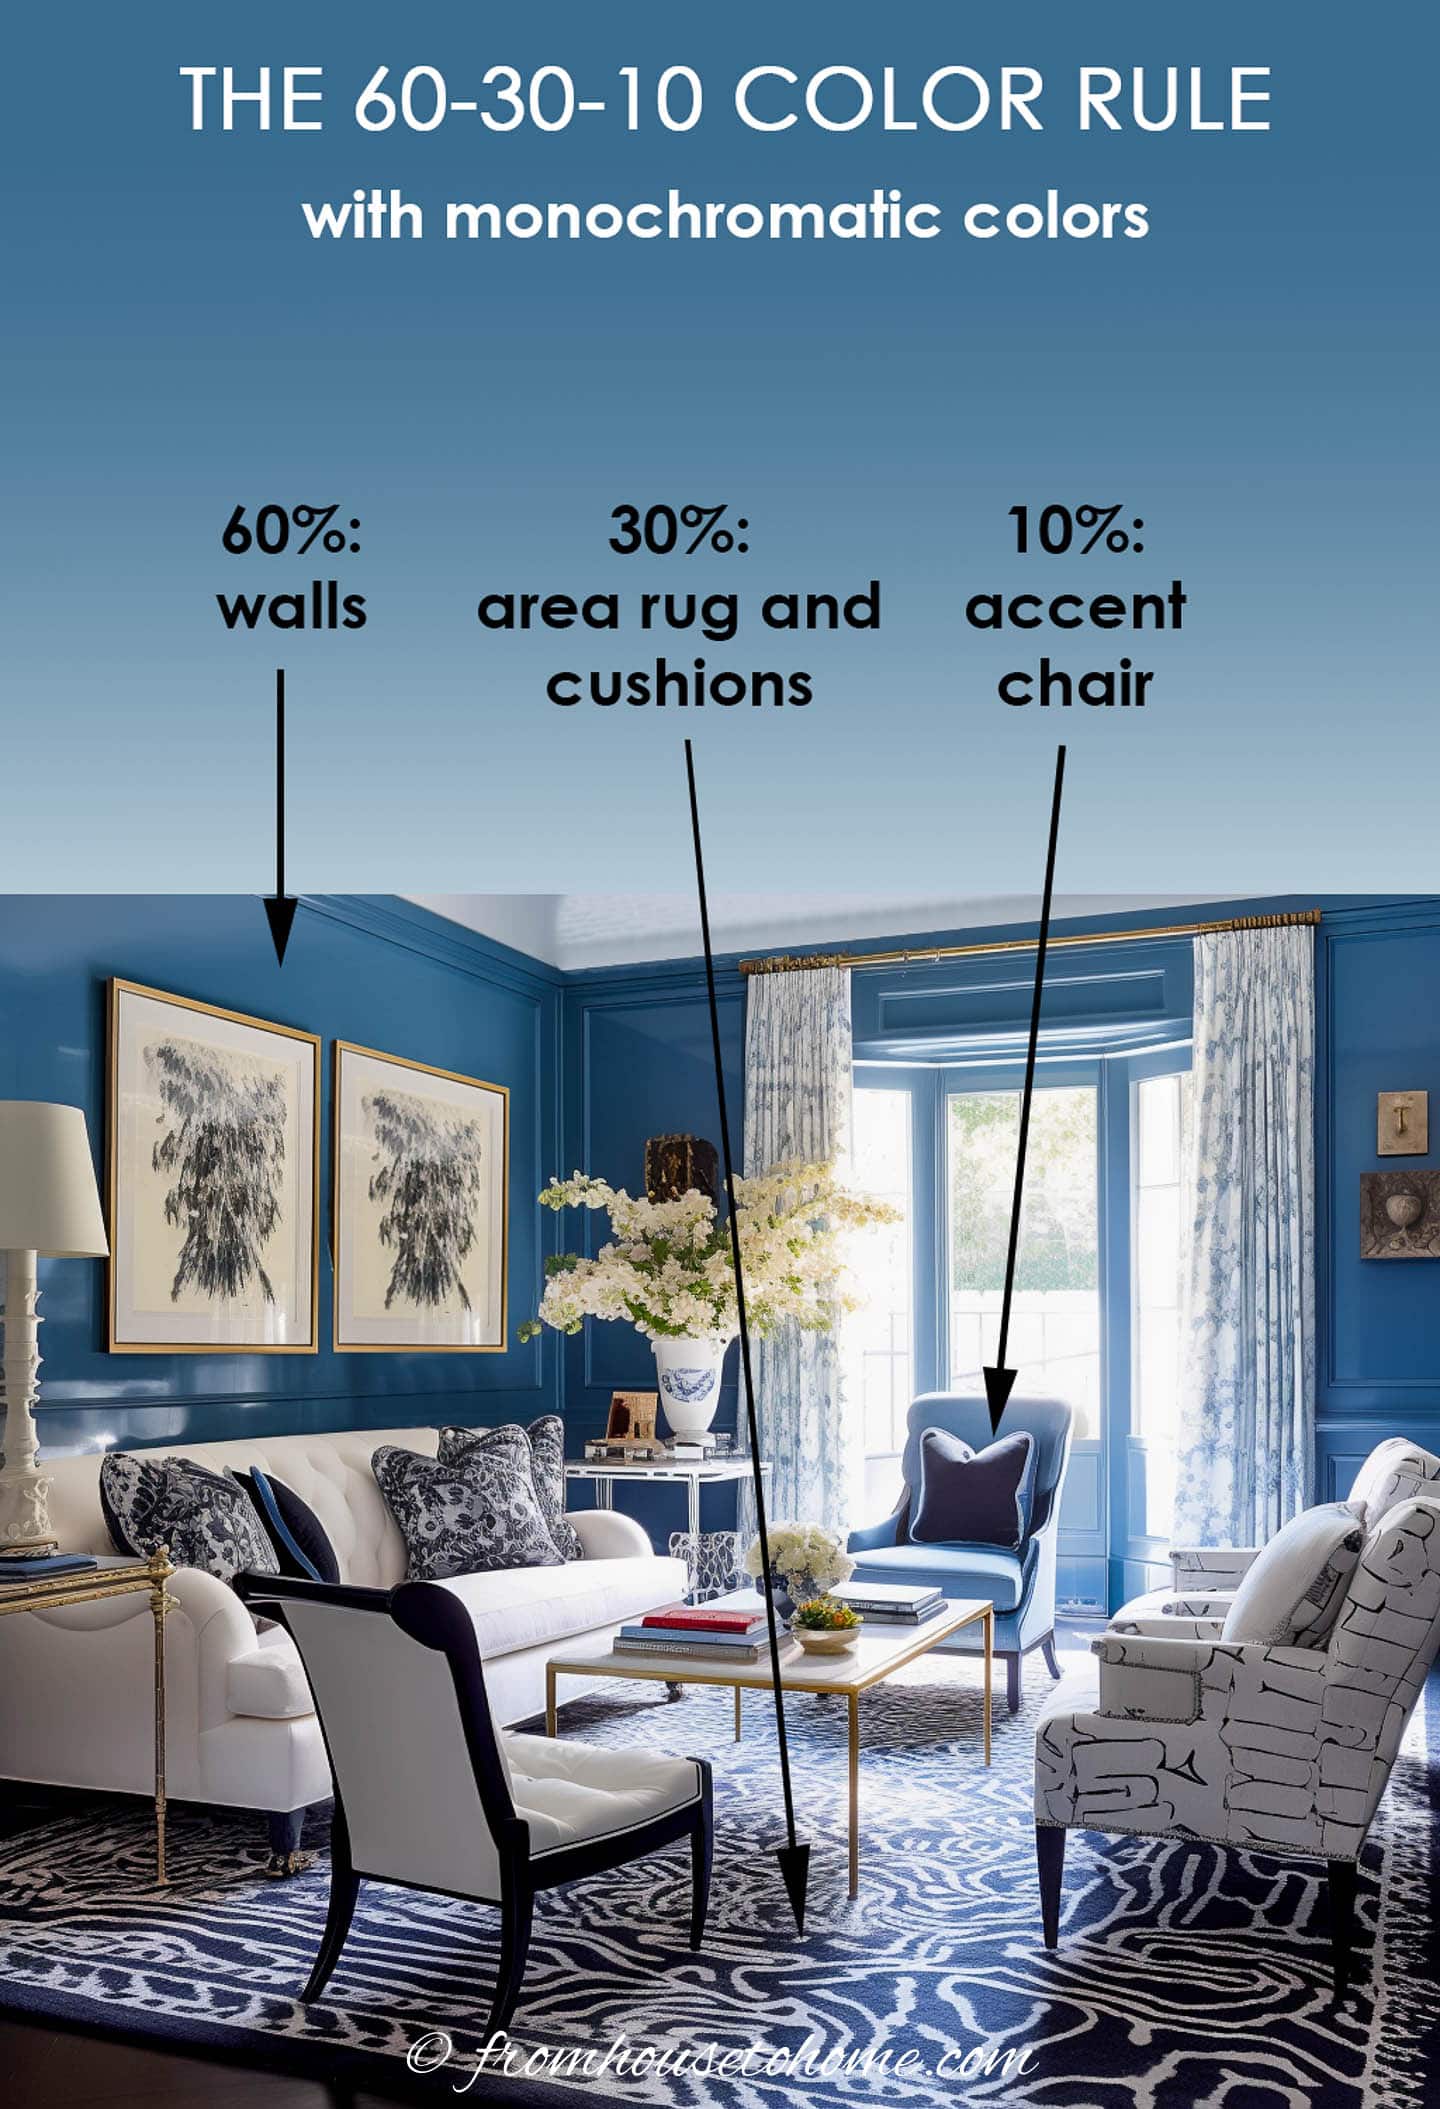 The 60-30-10 color rule with monochromatic colors in a blue and white living room